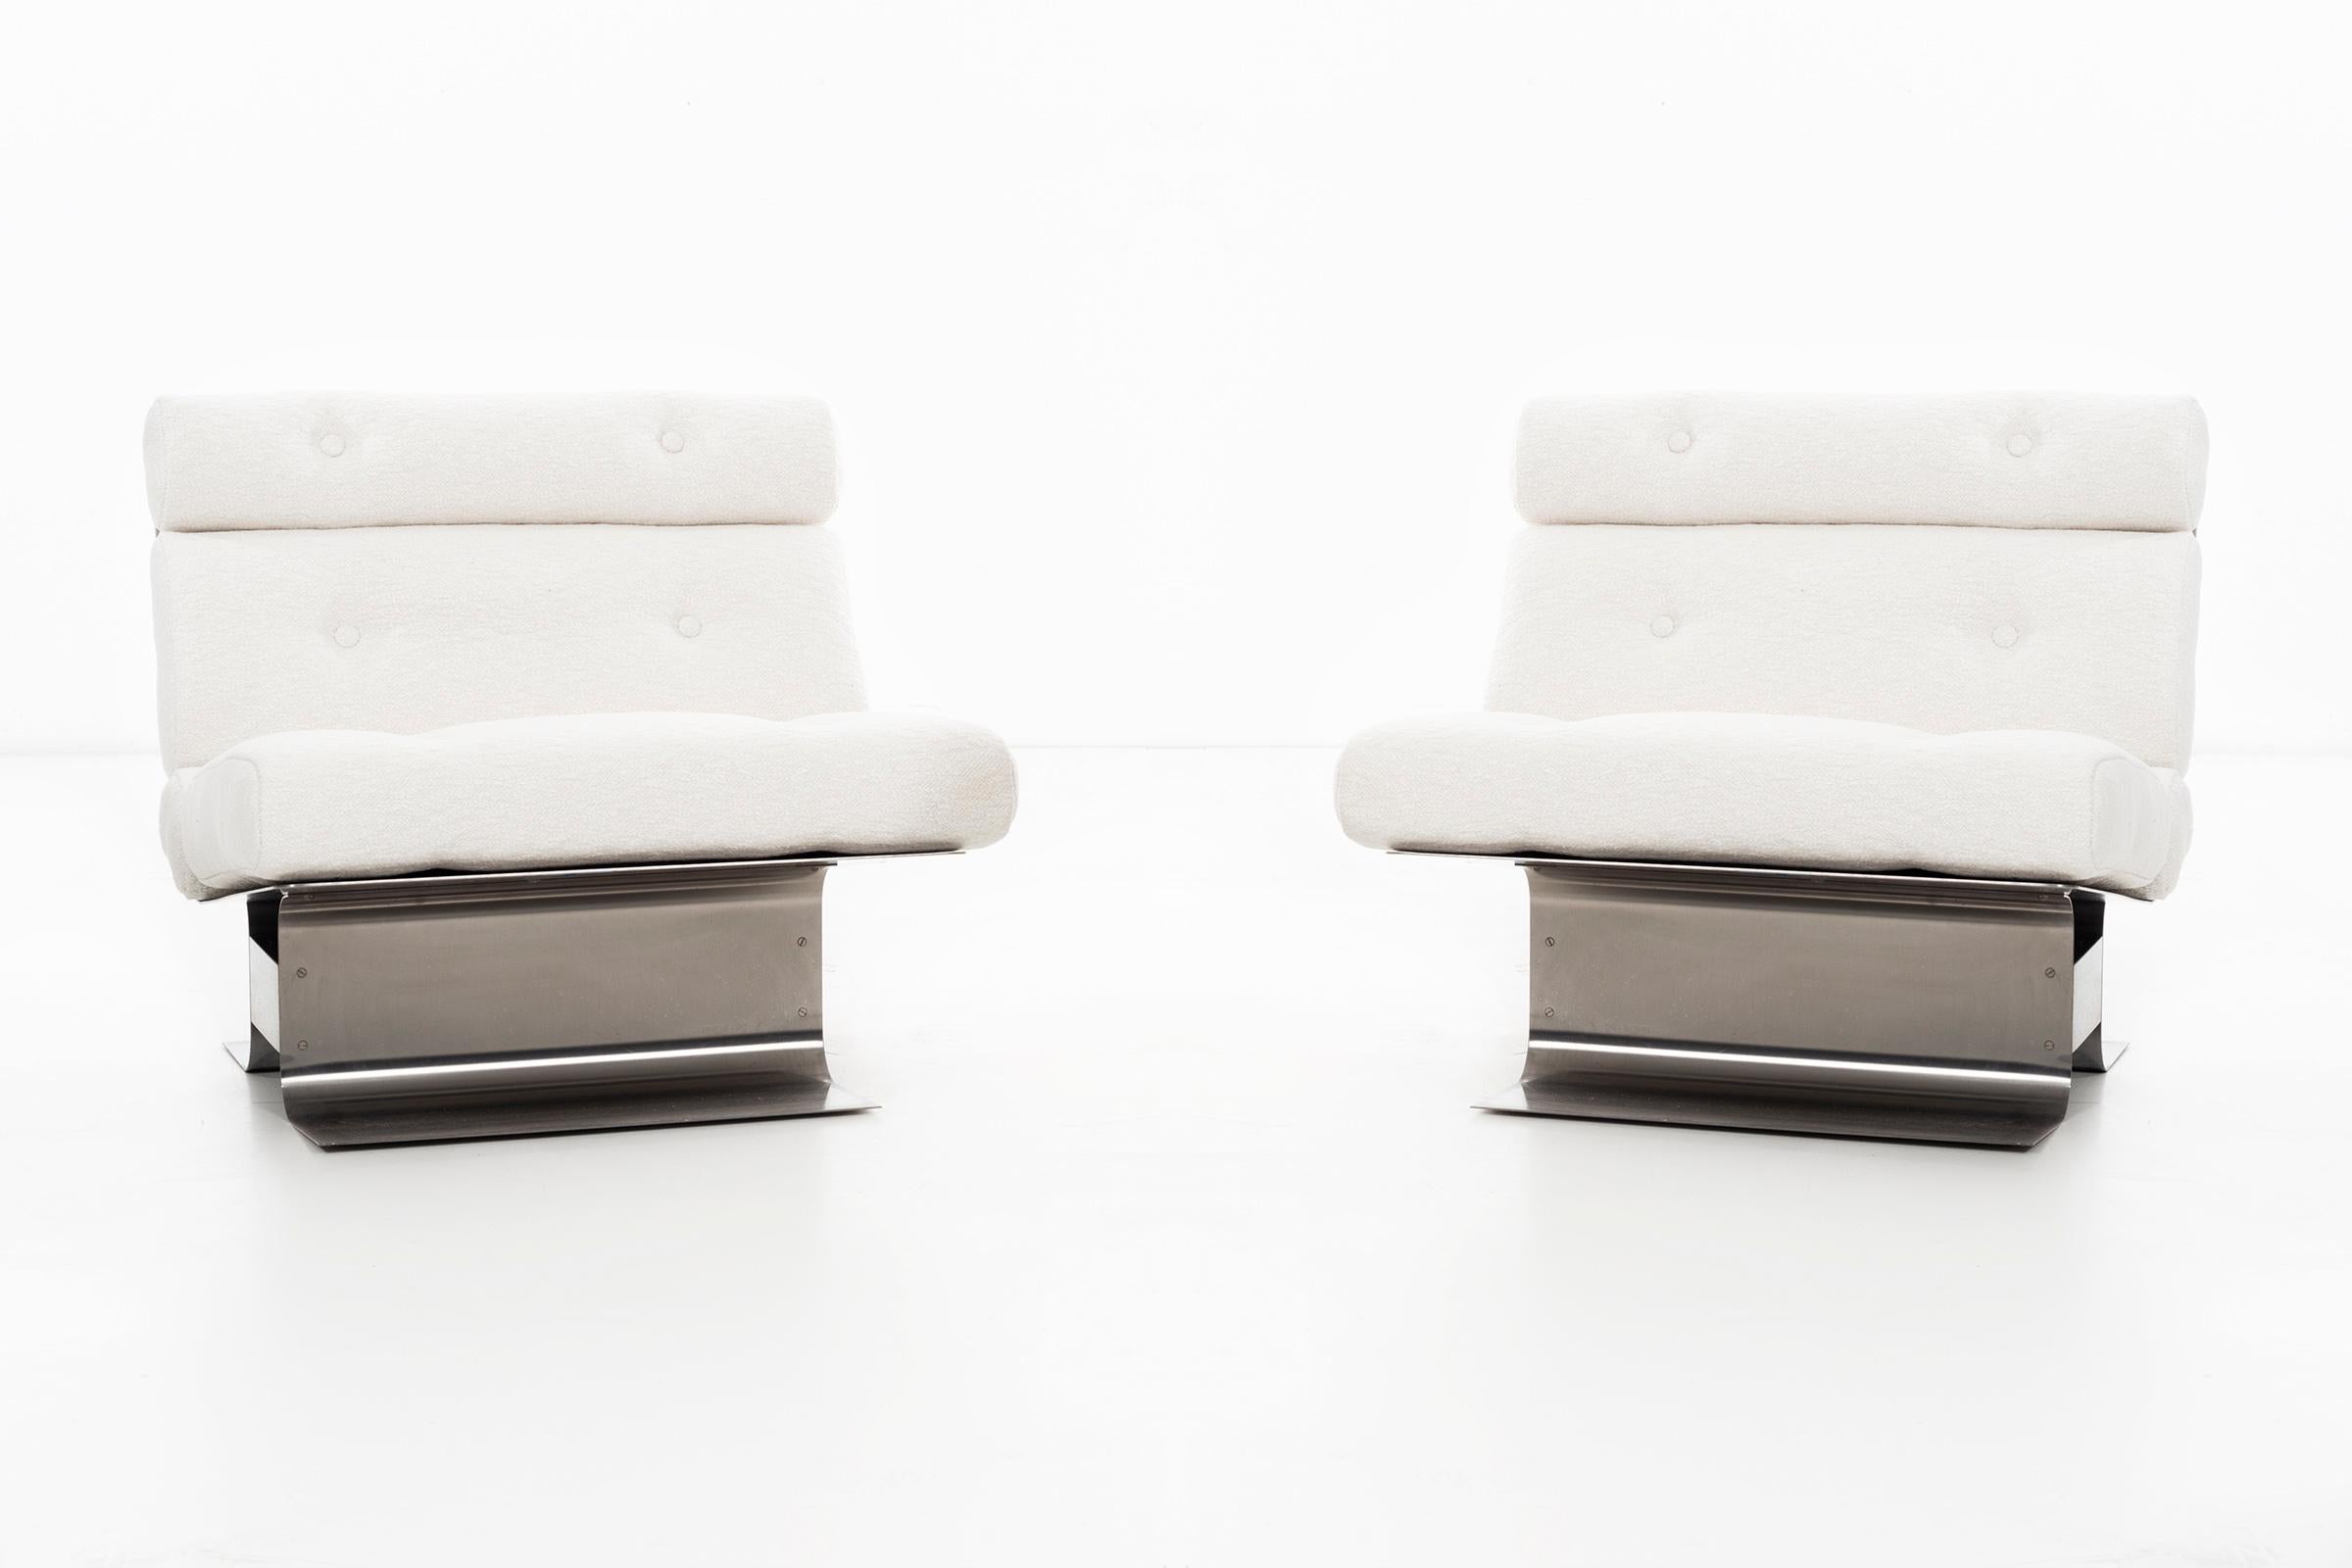 Monnet for Kappa of France, lounge chairs, sculpted stainless steel with newly upholstered seat and back in nubby wool-cotton blend by great plains.
 